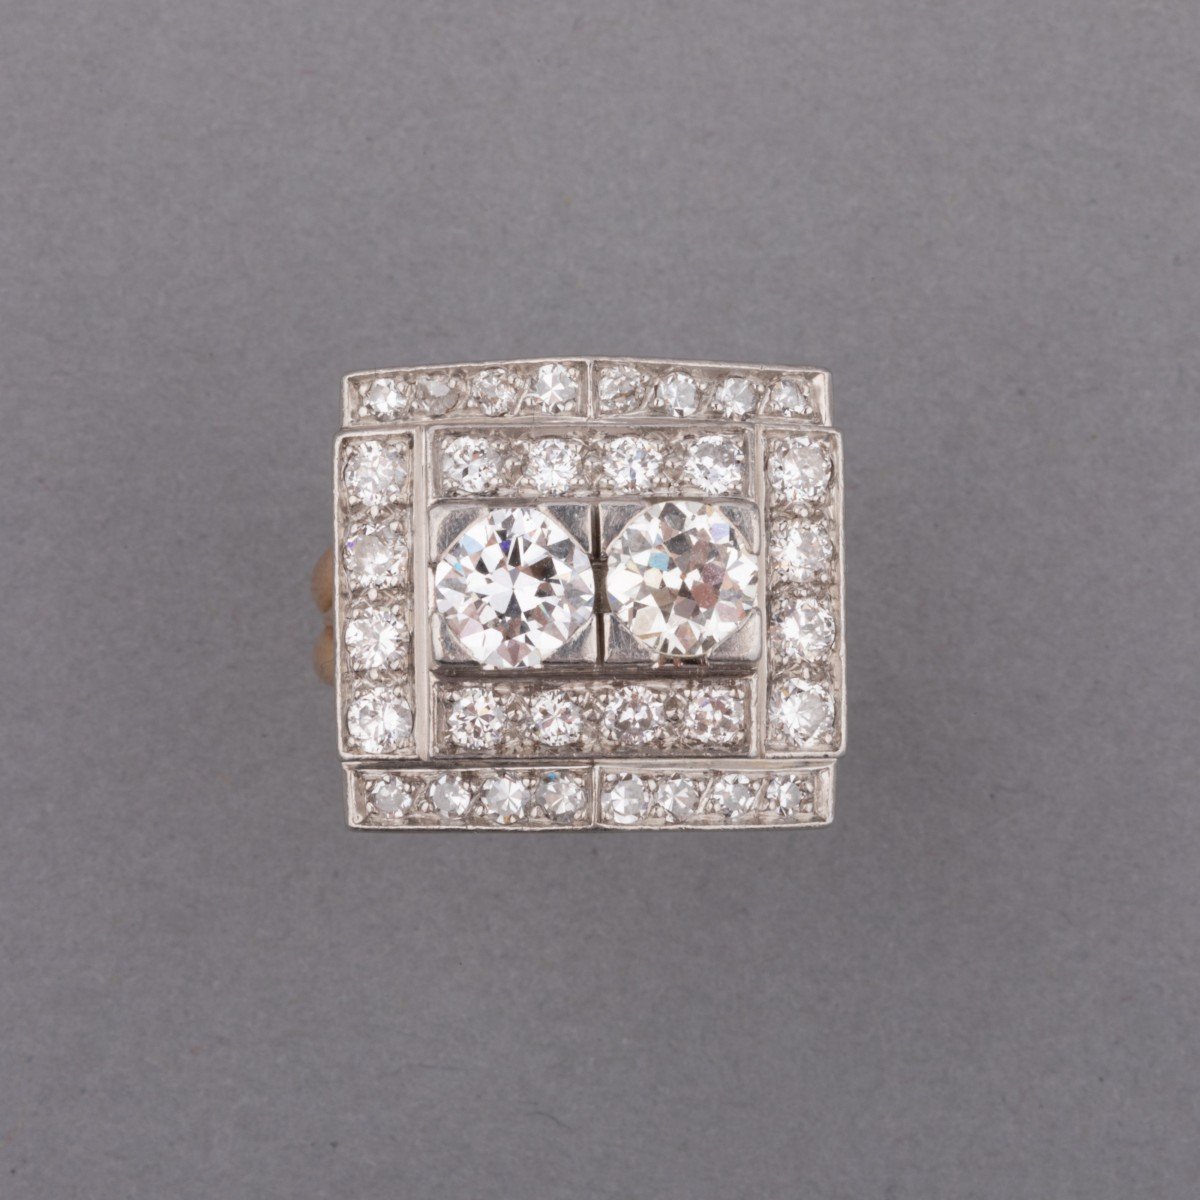 Old Ring In Platinum Gold And 3 Carats Of Diamonds-photo-1